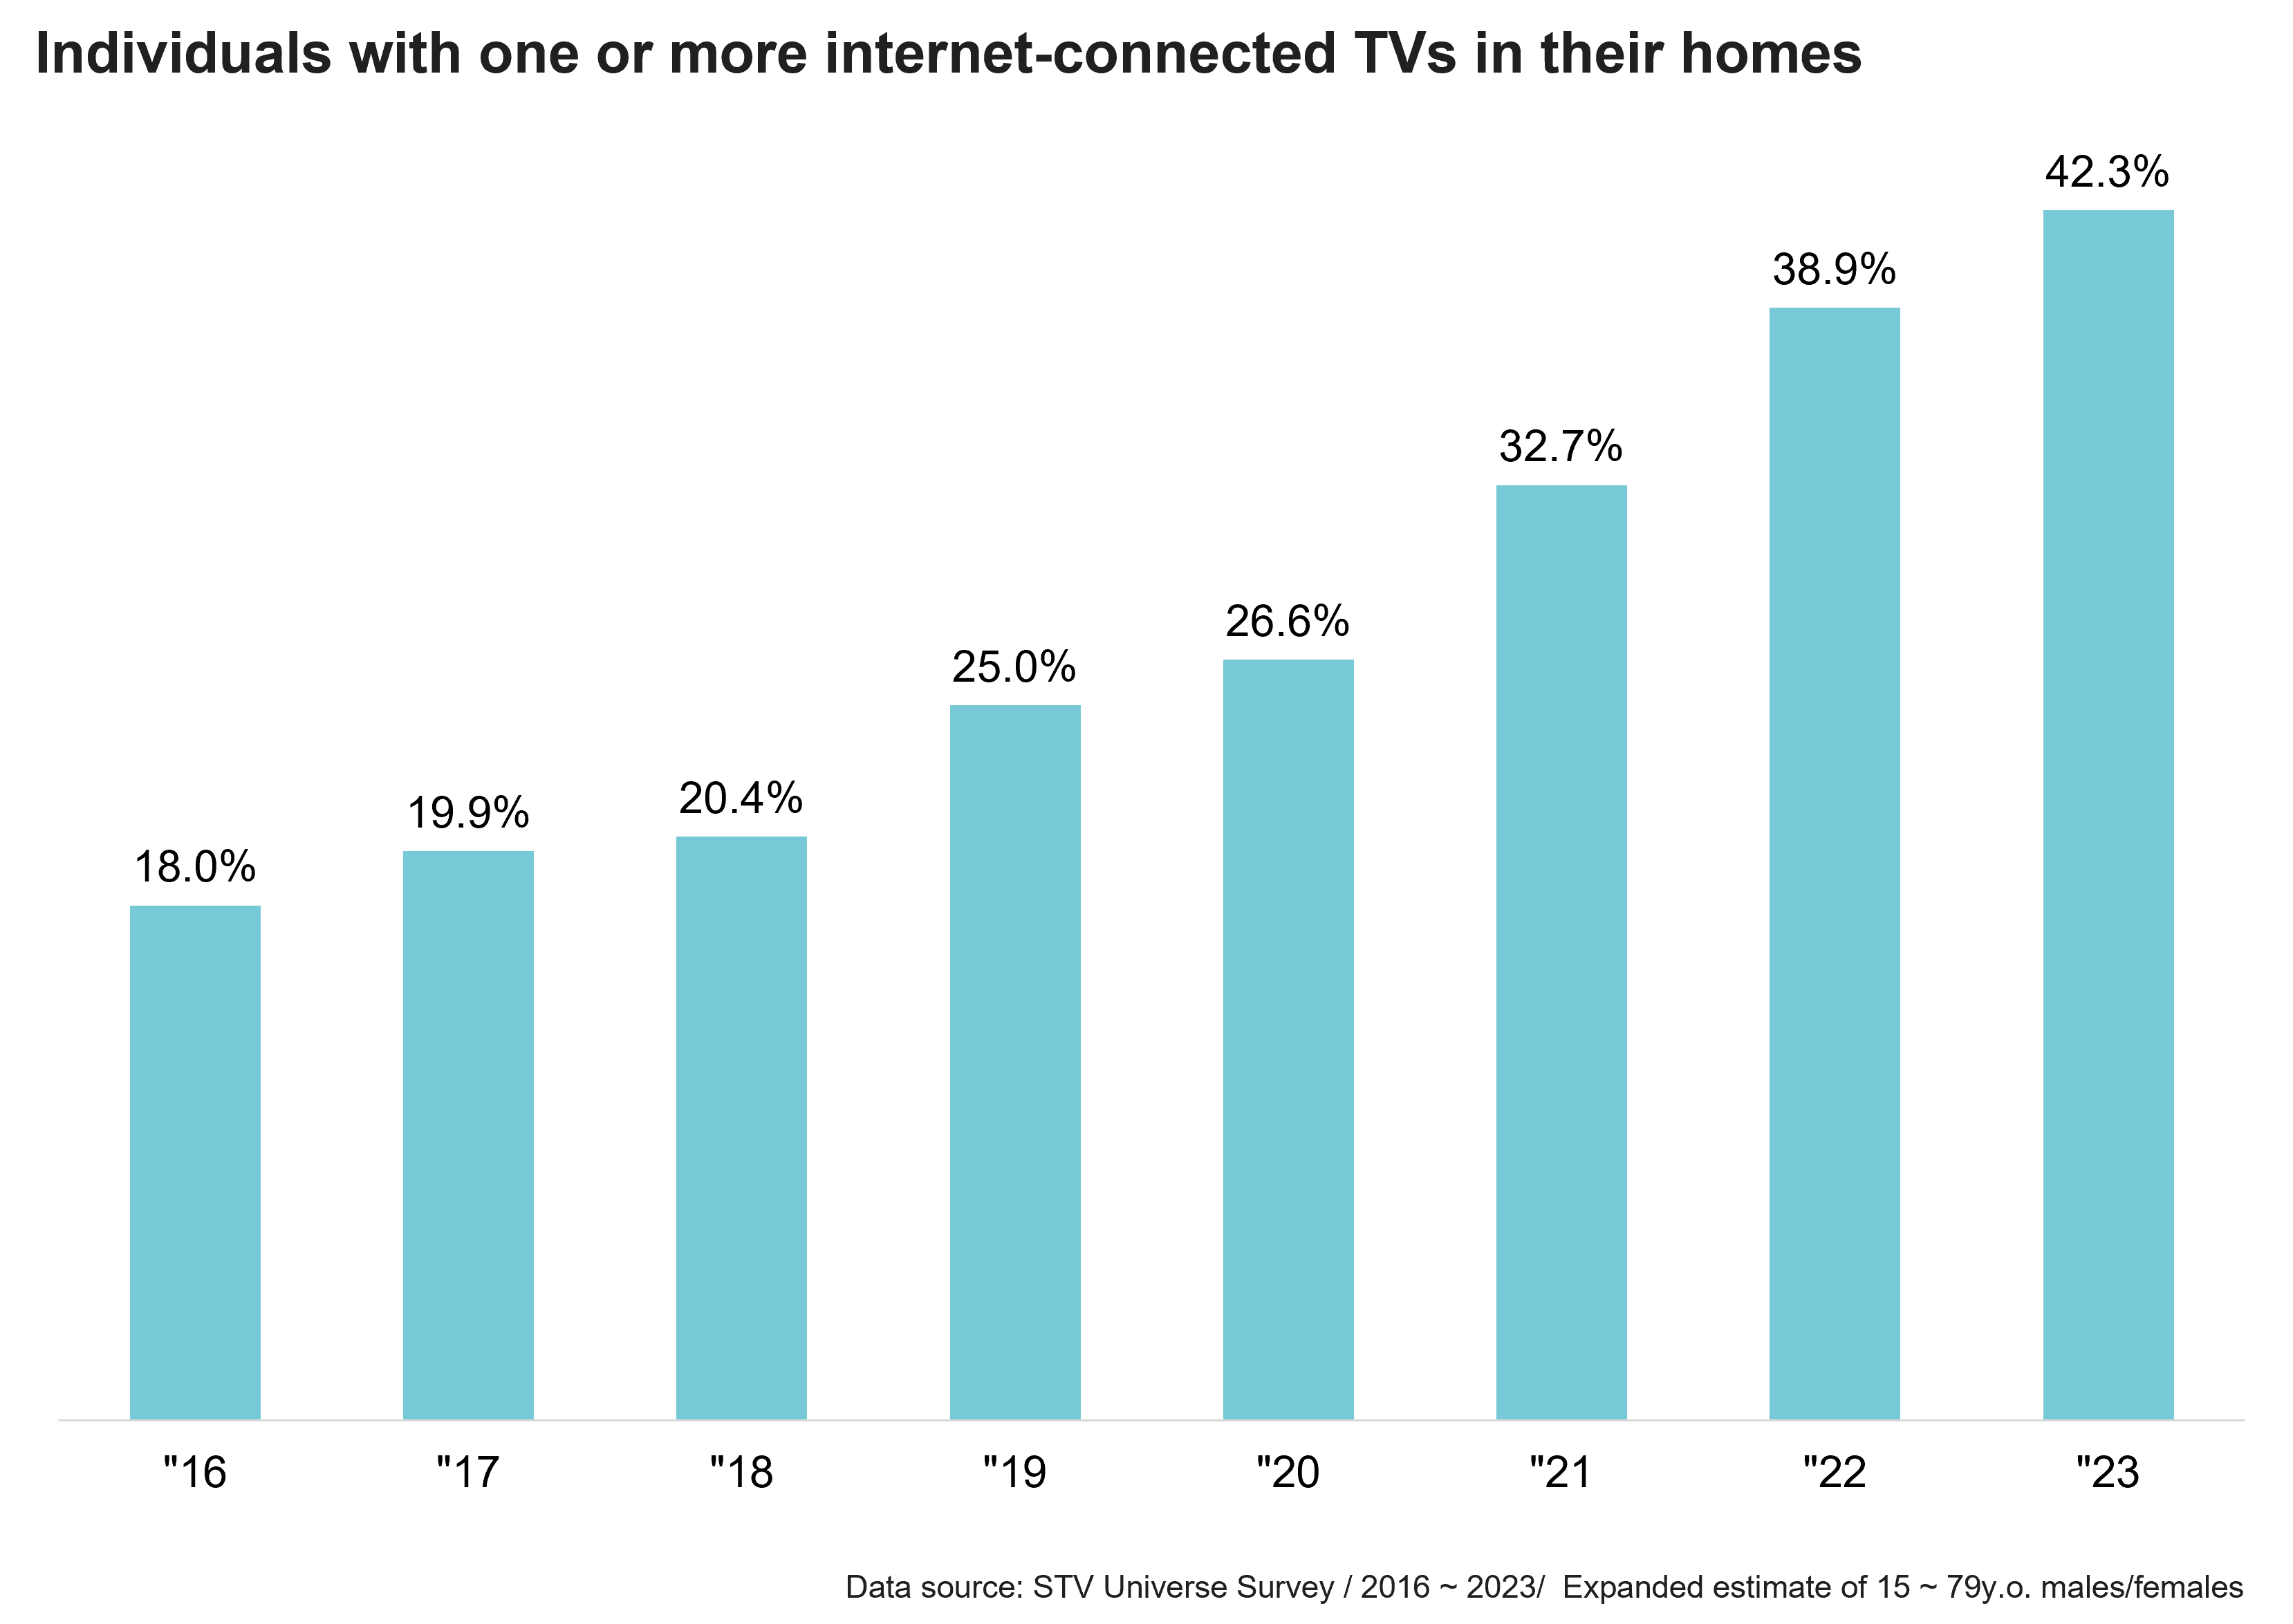 Individuals with one or more internet-connected TVs in their homes